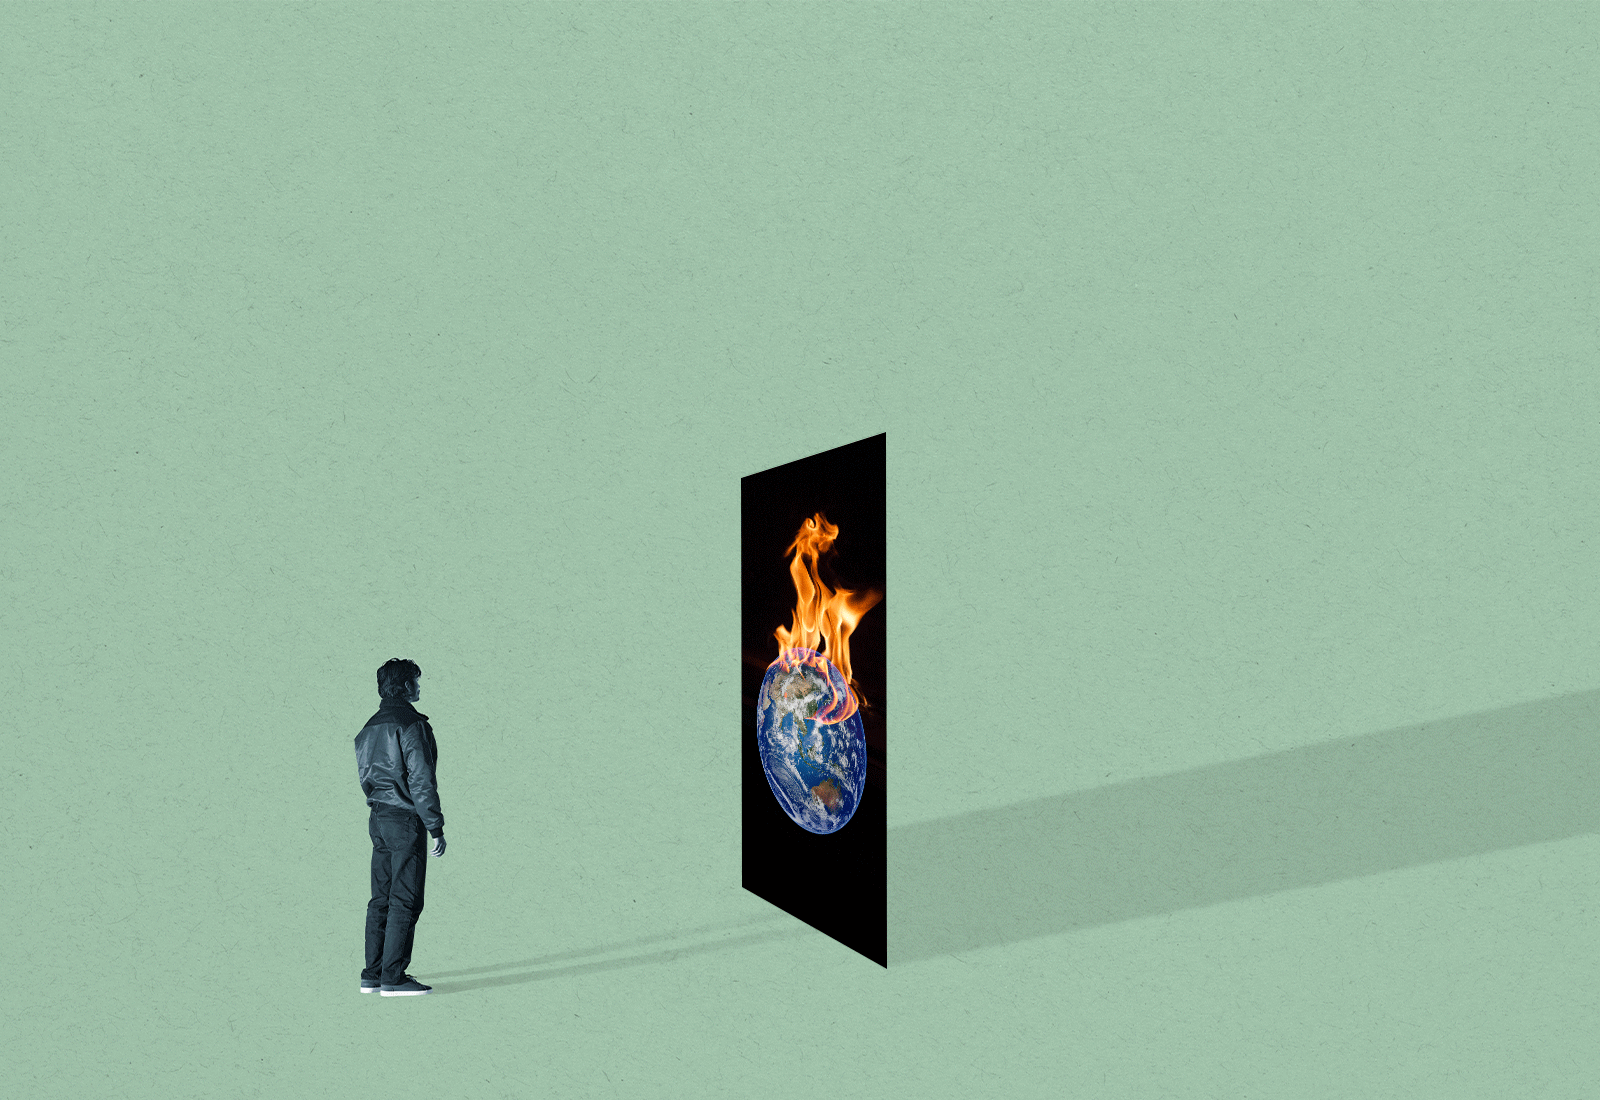 A person stands in front of a panel showing the Earth on fire